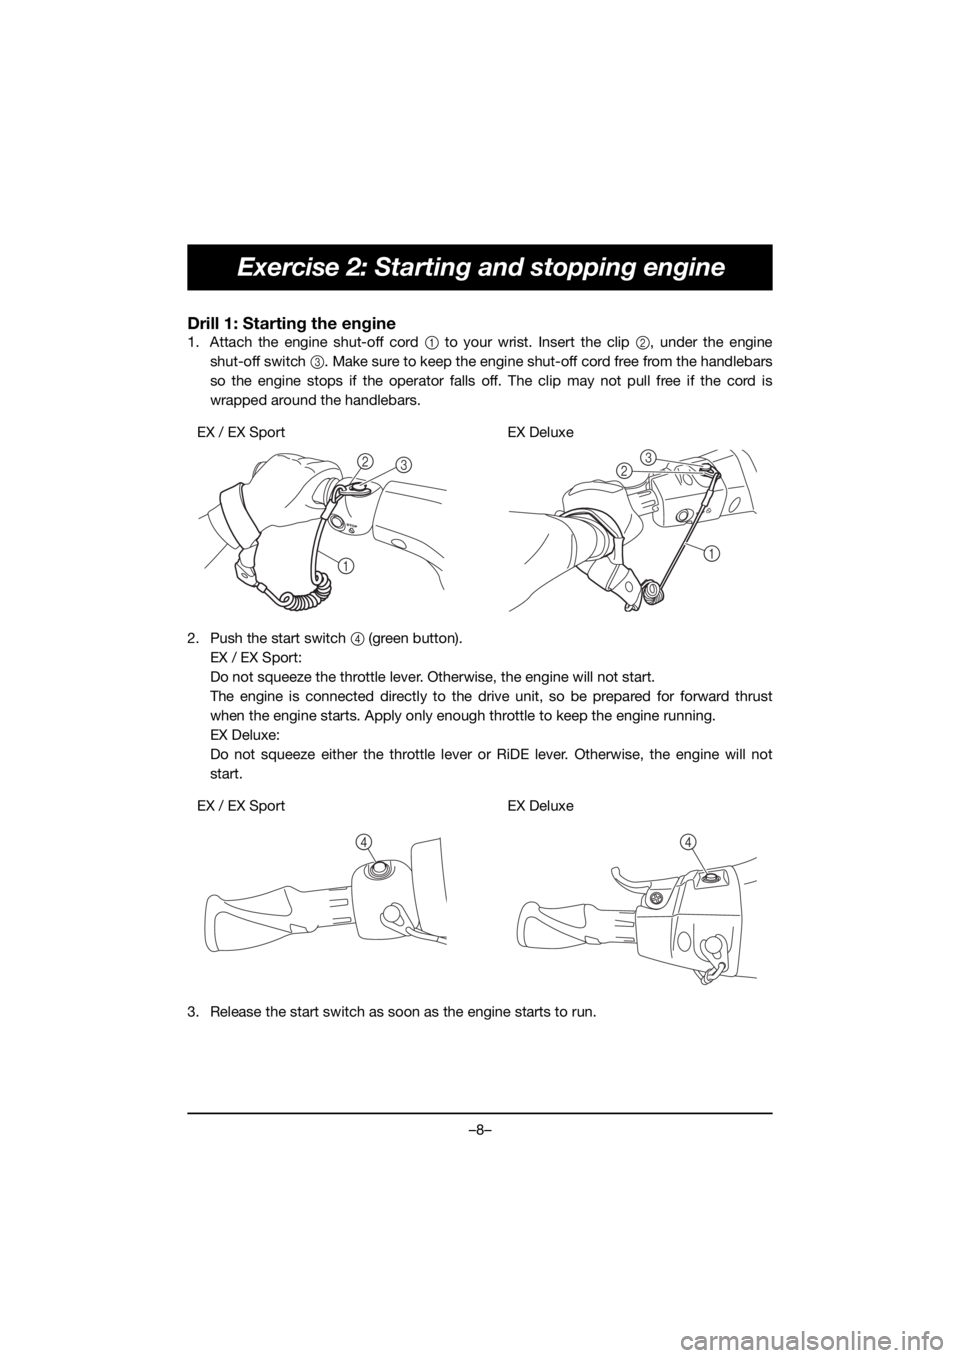 YAMAHA EX SPORT 2020  Owners Manual –8–
Exercise 2: Starting and stopping engine
Drill 1: Starting the engine
1. Attach the engine shut-off cord 1 to your wrist. Insert the clip 2, under the engine
shut-off switch 3. Make sure to ke